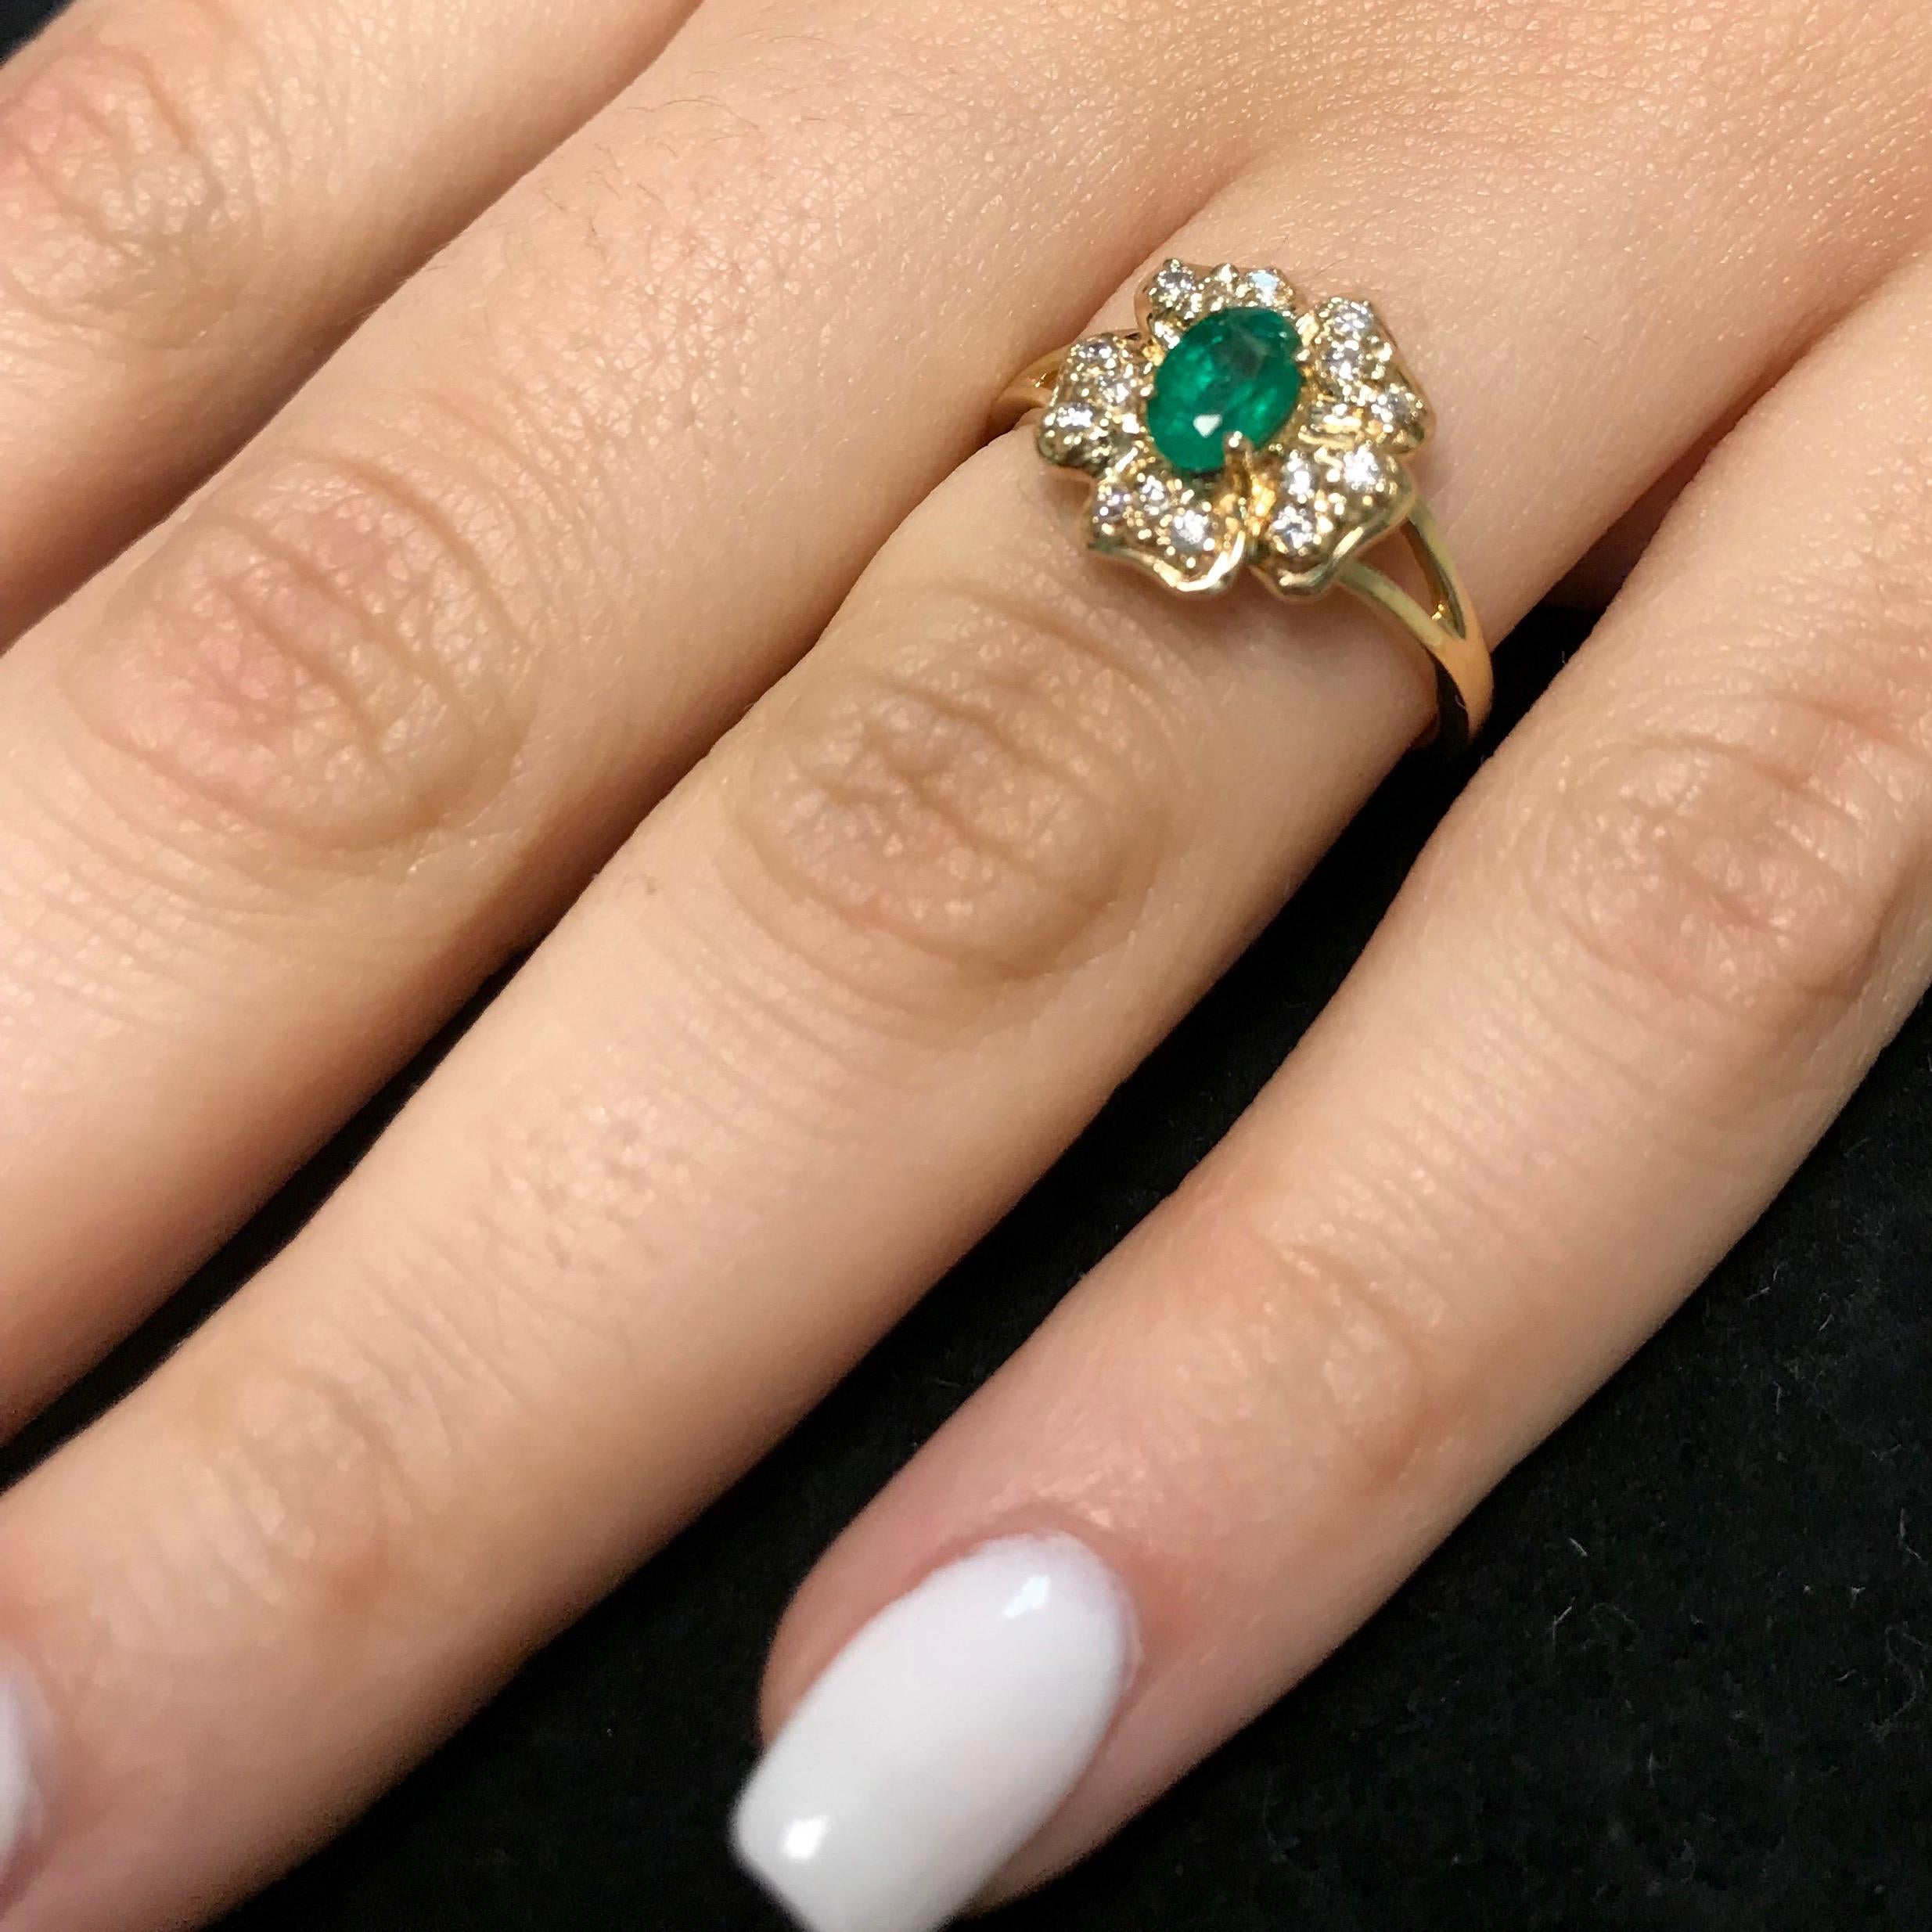 Material: 14k Yellow Gold 
Color Stone Details:  0.47 Carat Oval Cut Emerald 
Center Stone Details: 15 Round Cut White Diamonds at 0.15 Carats Clarity: SI  / Color: H-I
Ring Size: Size 6.5. Alberto offers complimentary sizing on all rings.

Fine